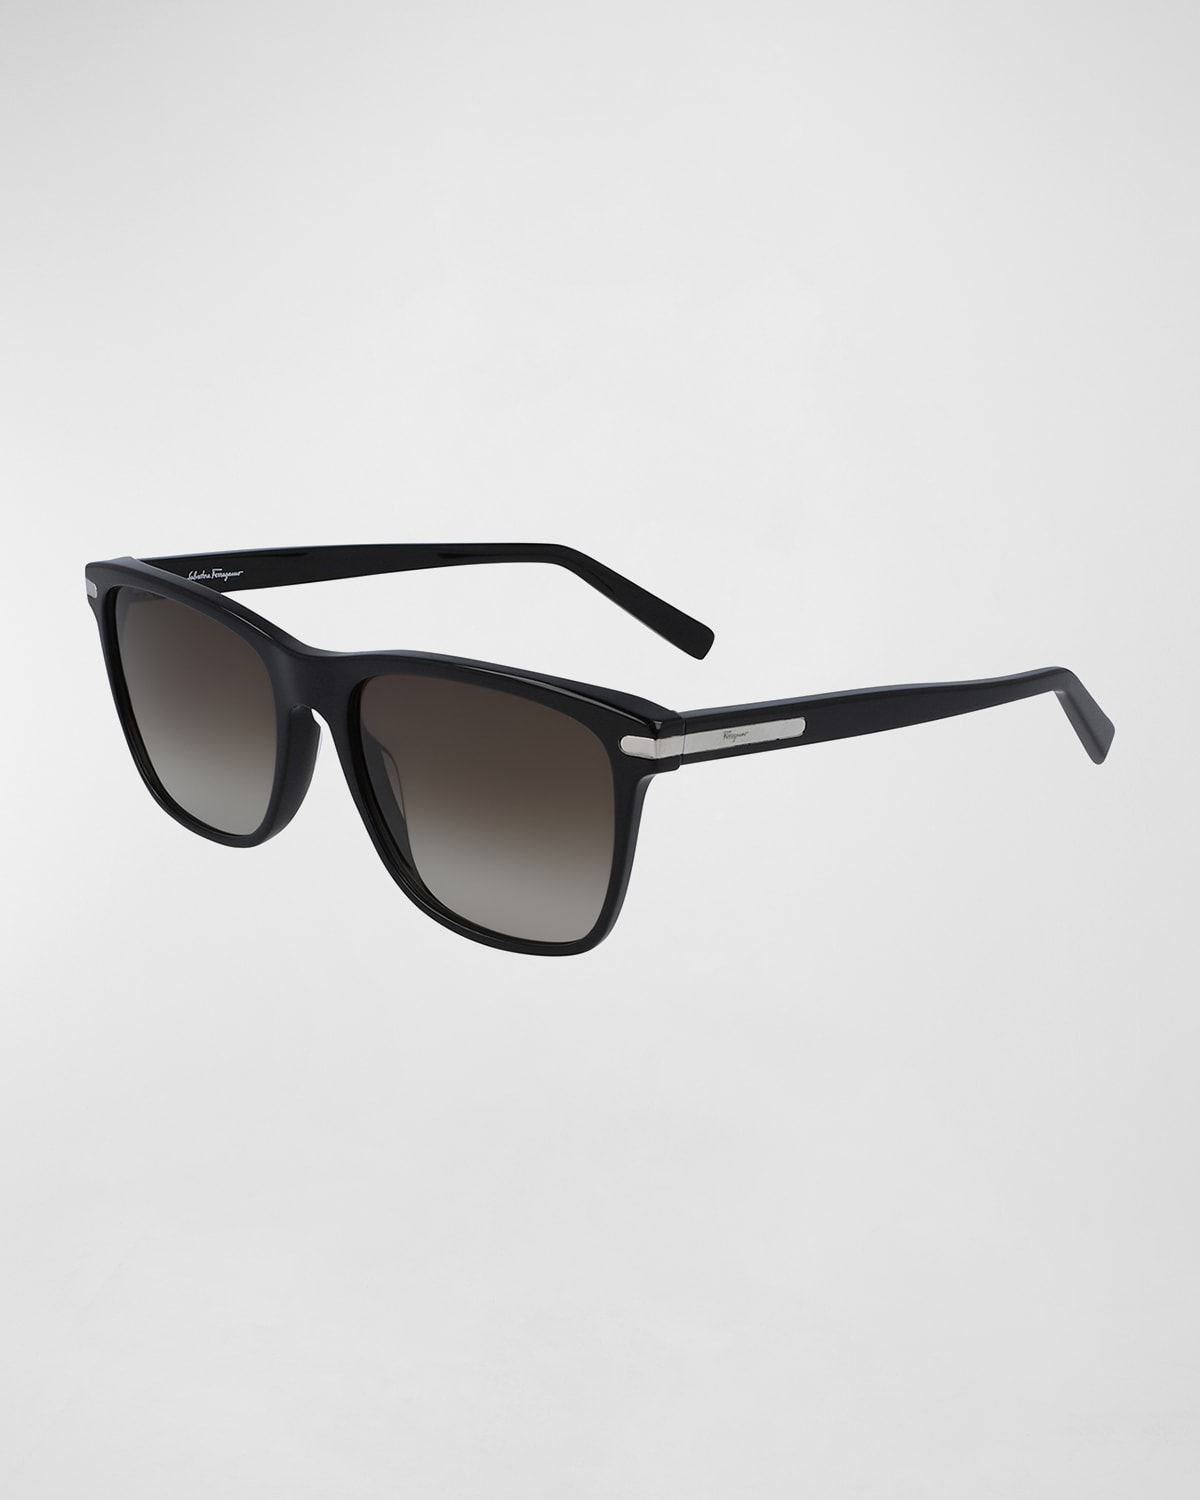 Men's Square Sunglasses with Metal Detail